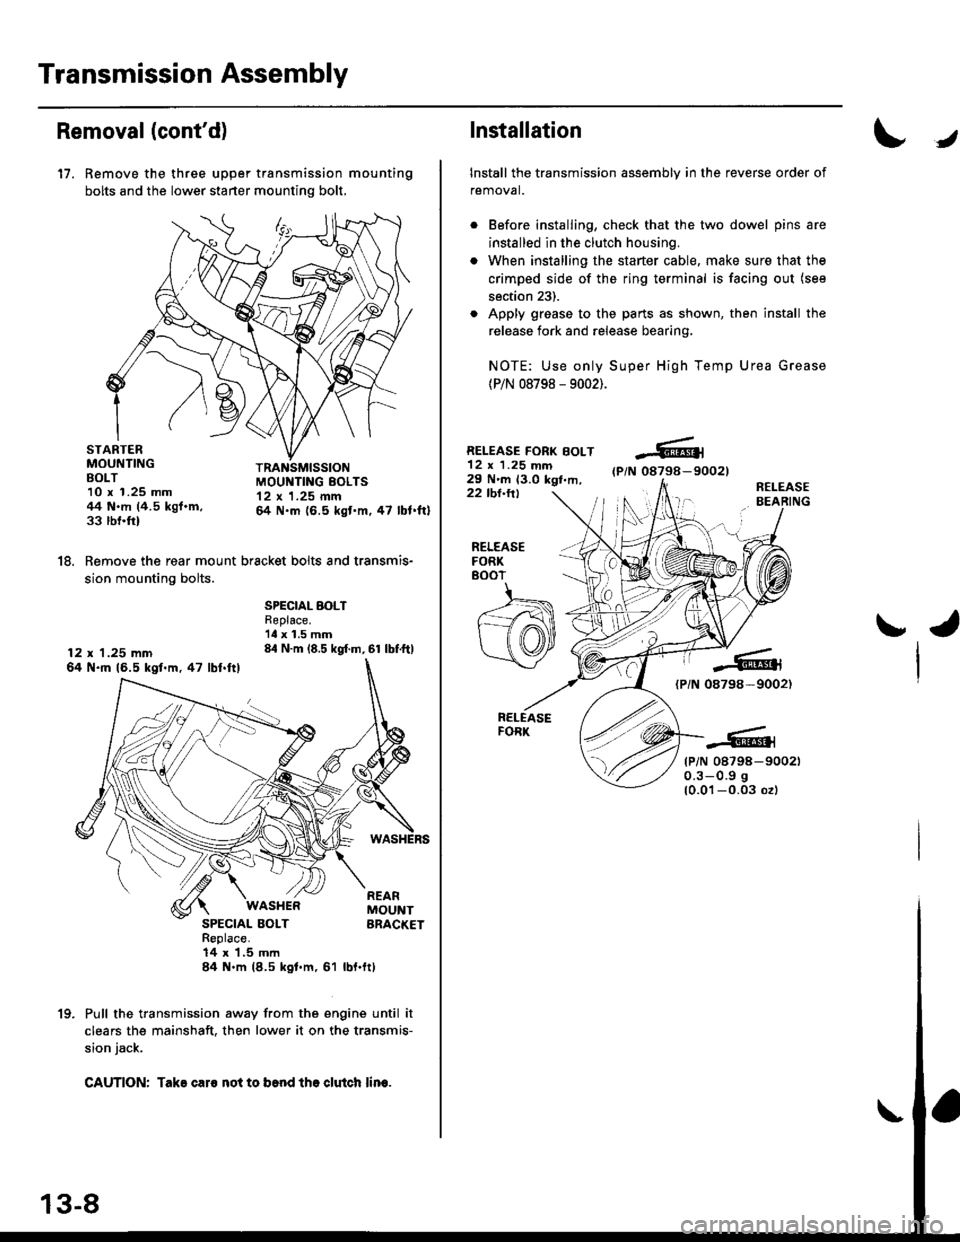 HONDA CIVIC 1998 6.G Workshop Manual Transmission Assembly
Removal(contd)
17. Remove the three upper transmission mounting
bolts and the lower starter mounting bolt,
STARTERMOUNTINGBOLT10 x 1.25 mm44 N.m (4.5 kgf.m,33 rbnftl
TRANSMISSIO